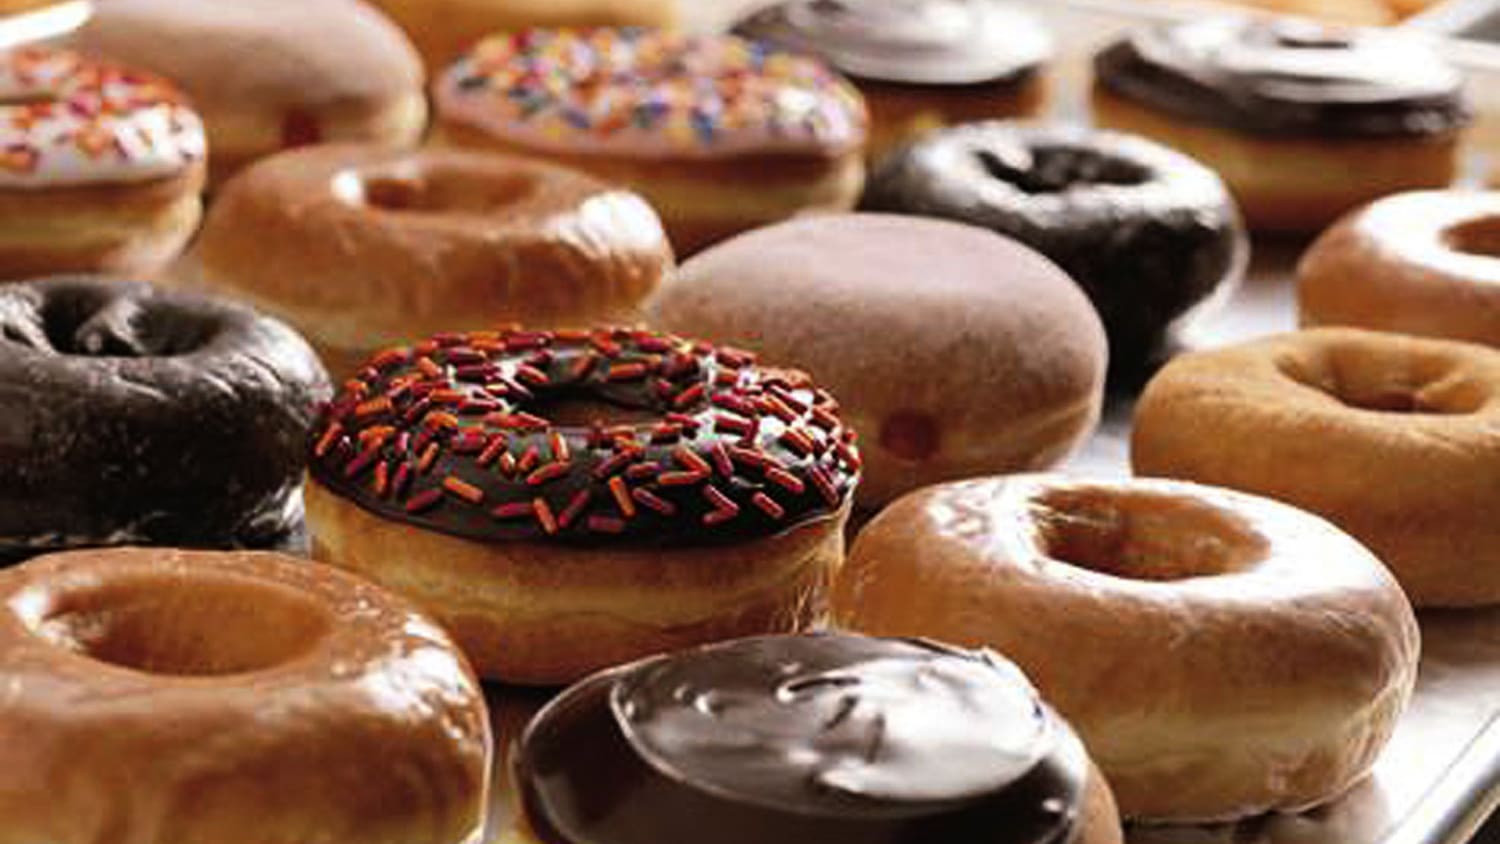 Dunkin' Donuts blueberry donut lawsuit - TODAY.com